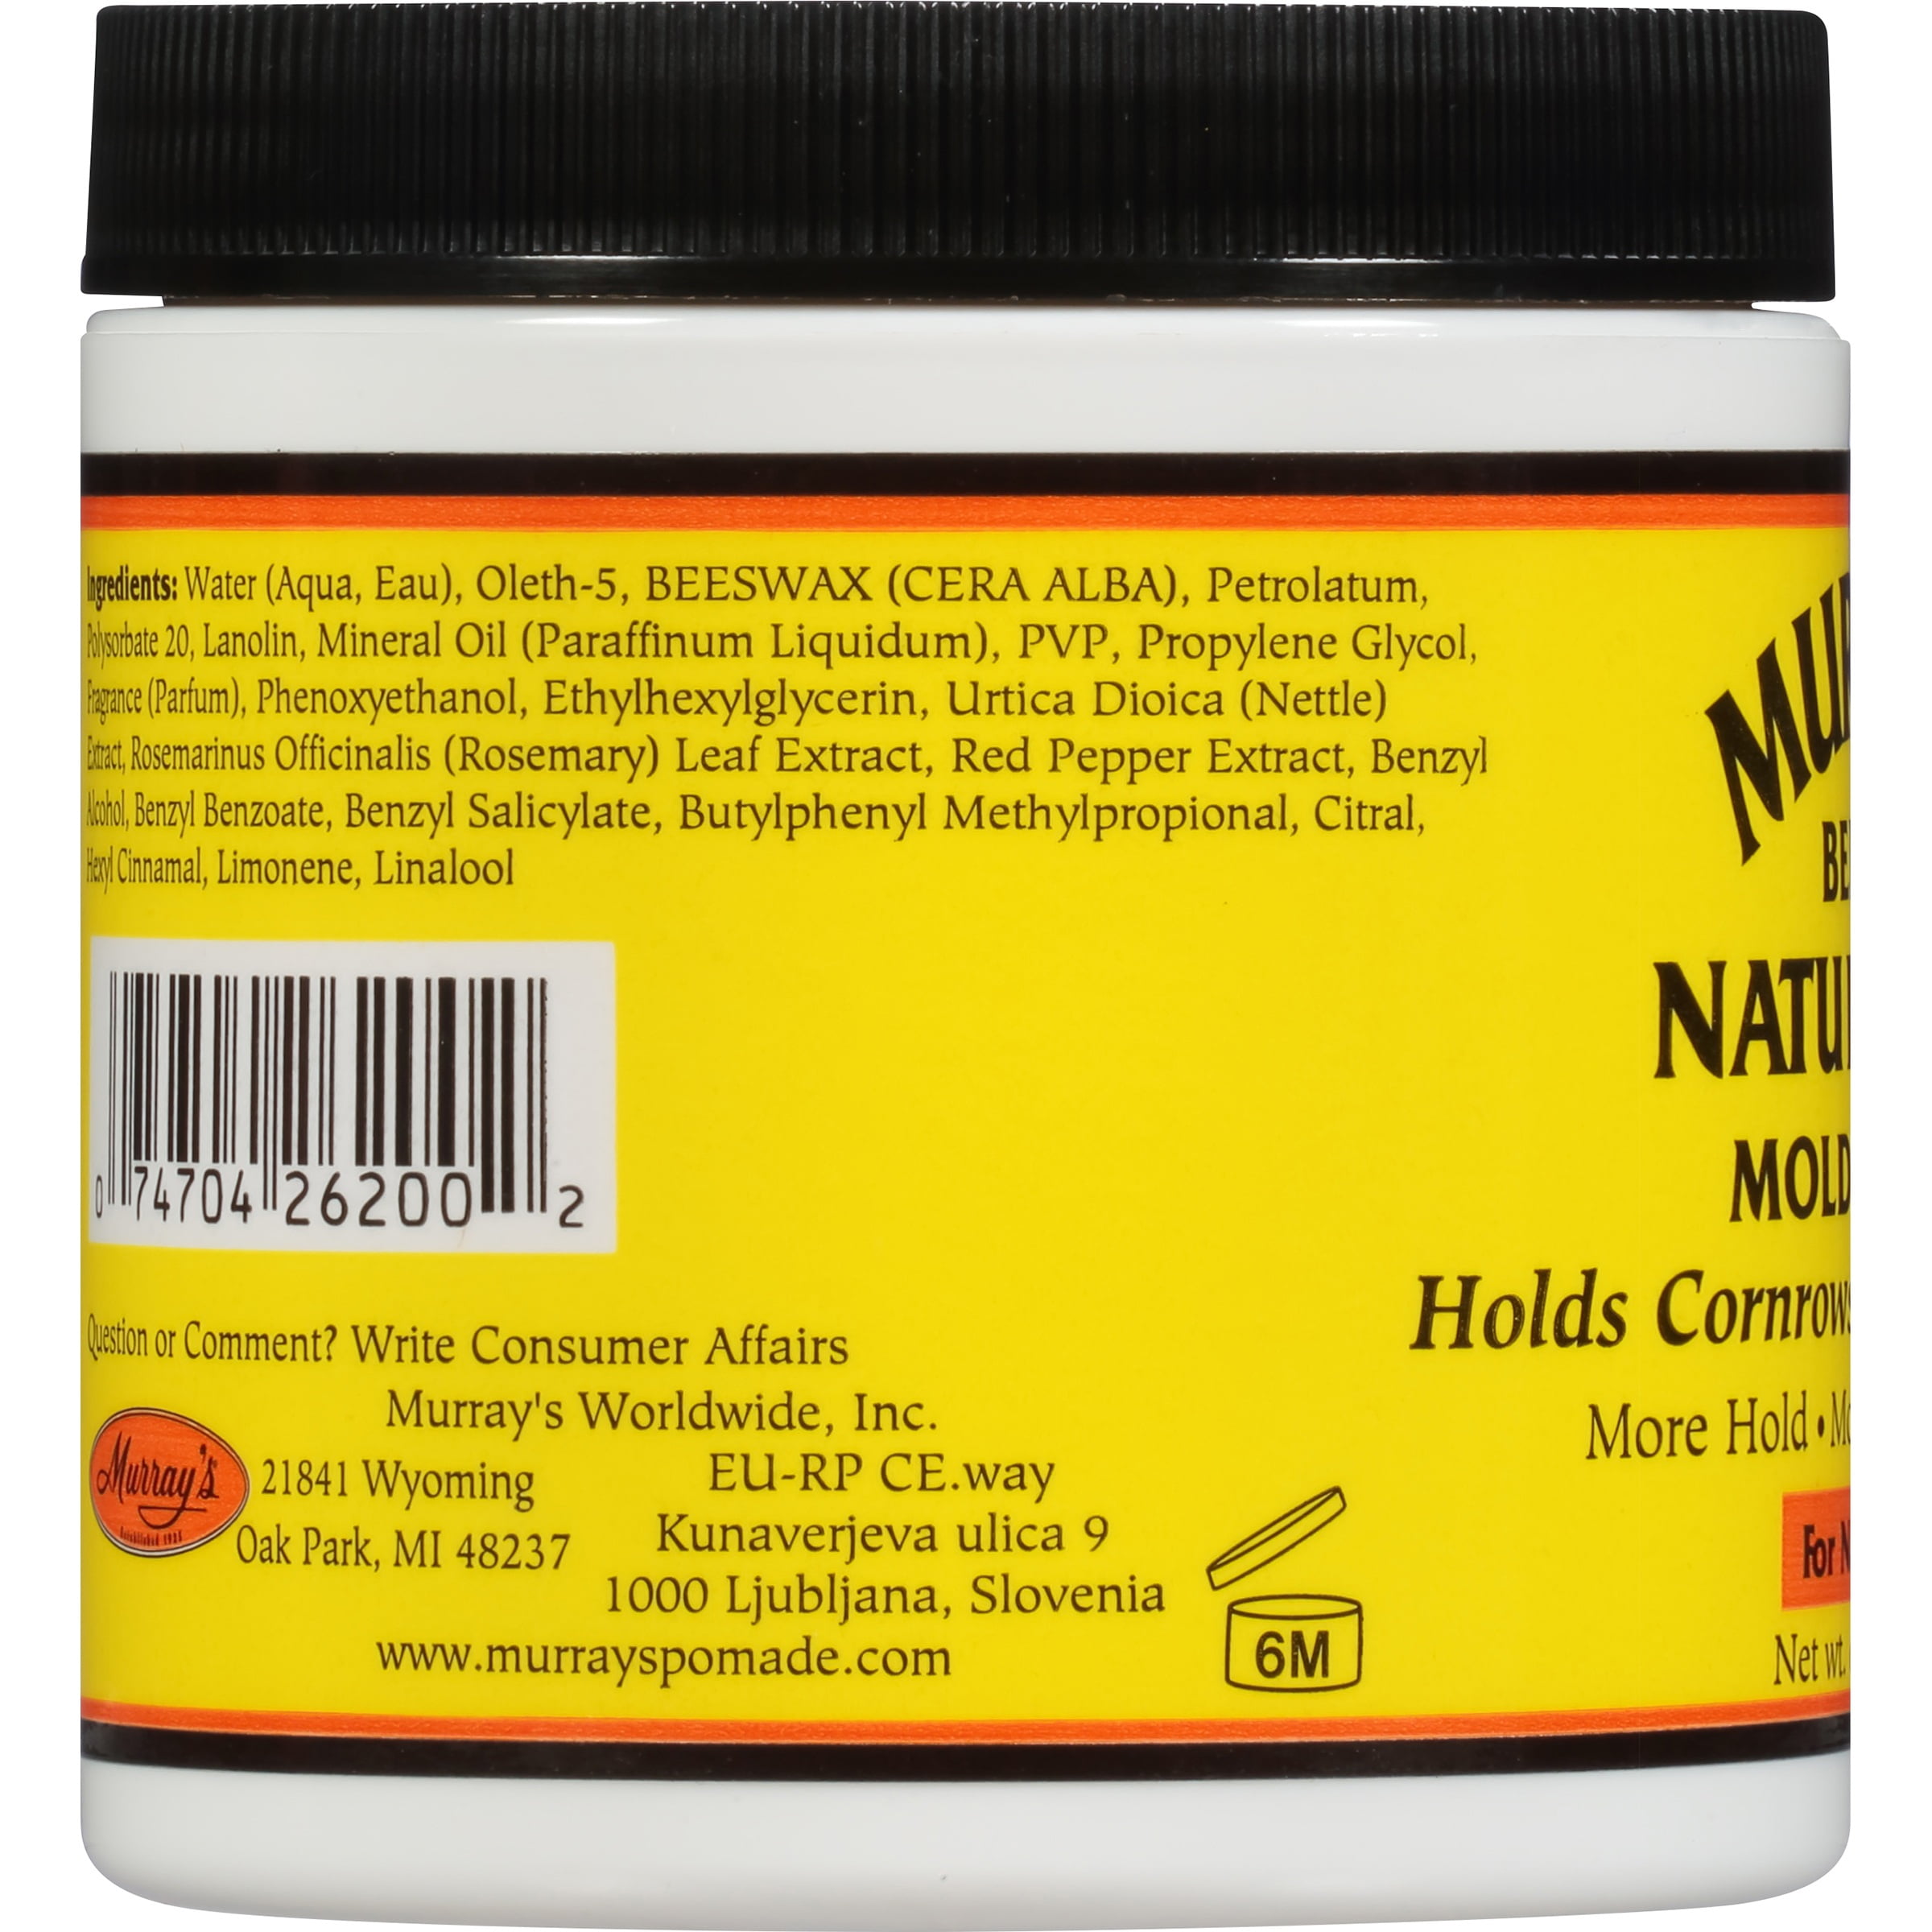 Murray's: Beeswax Natural-Loc Molding Paste 6oz – Beauty Depot O-Store